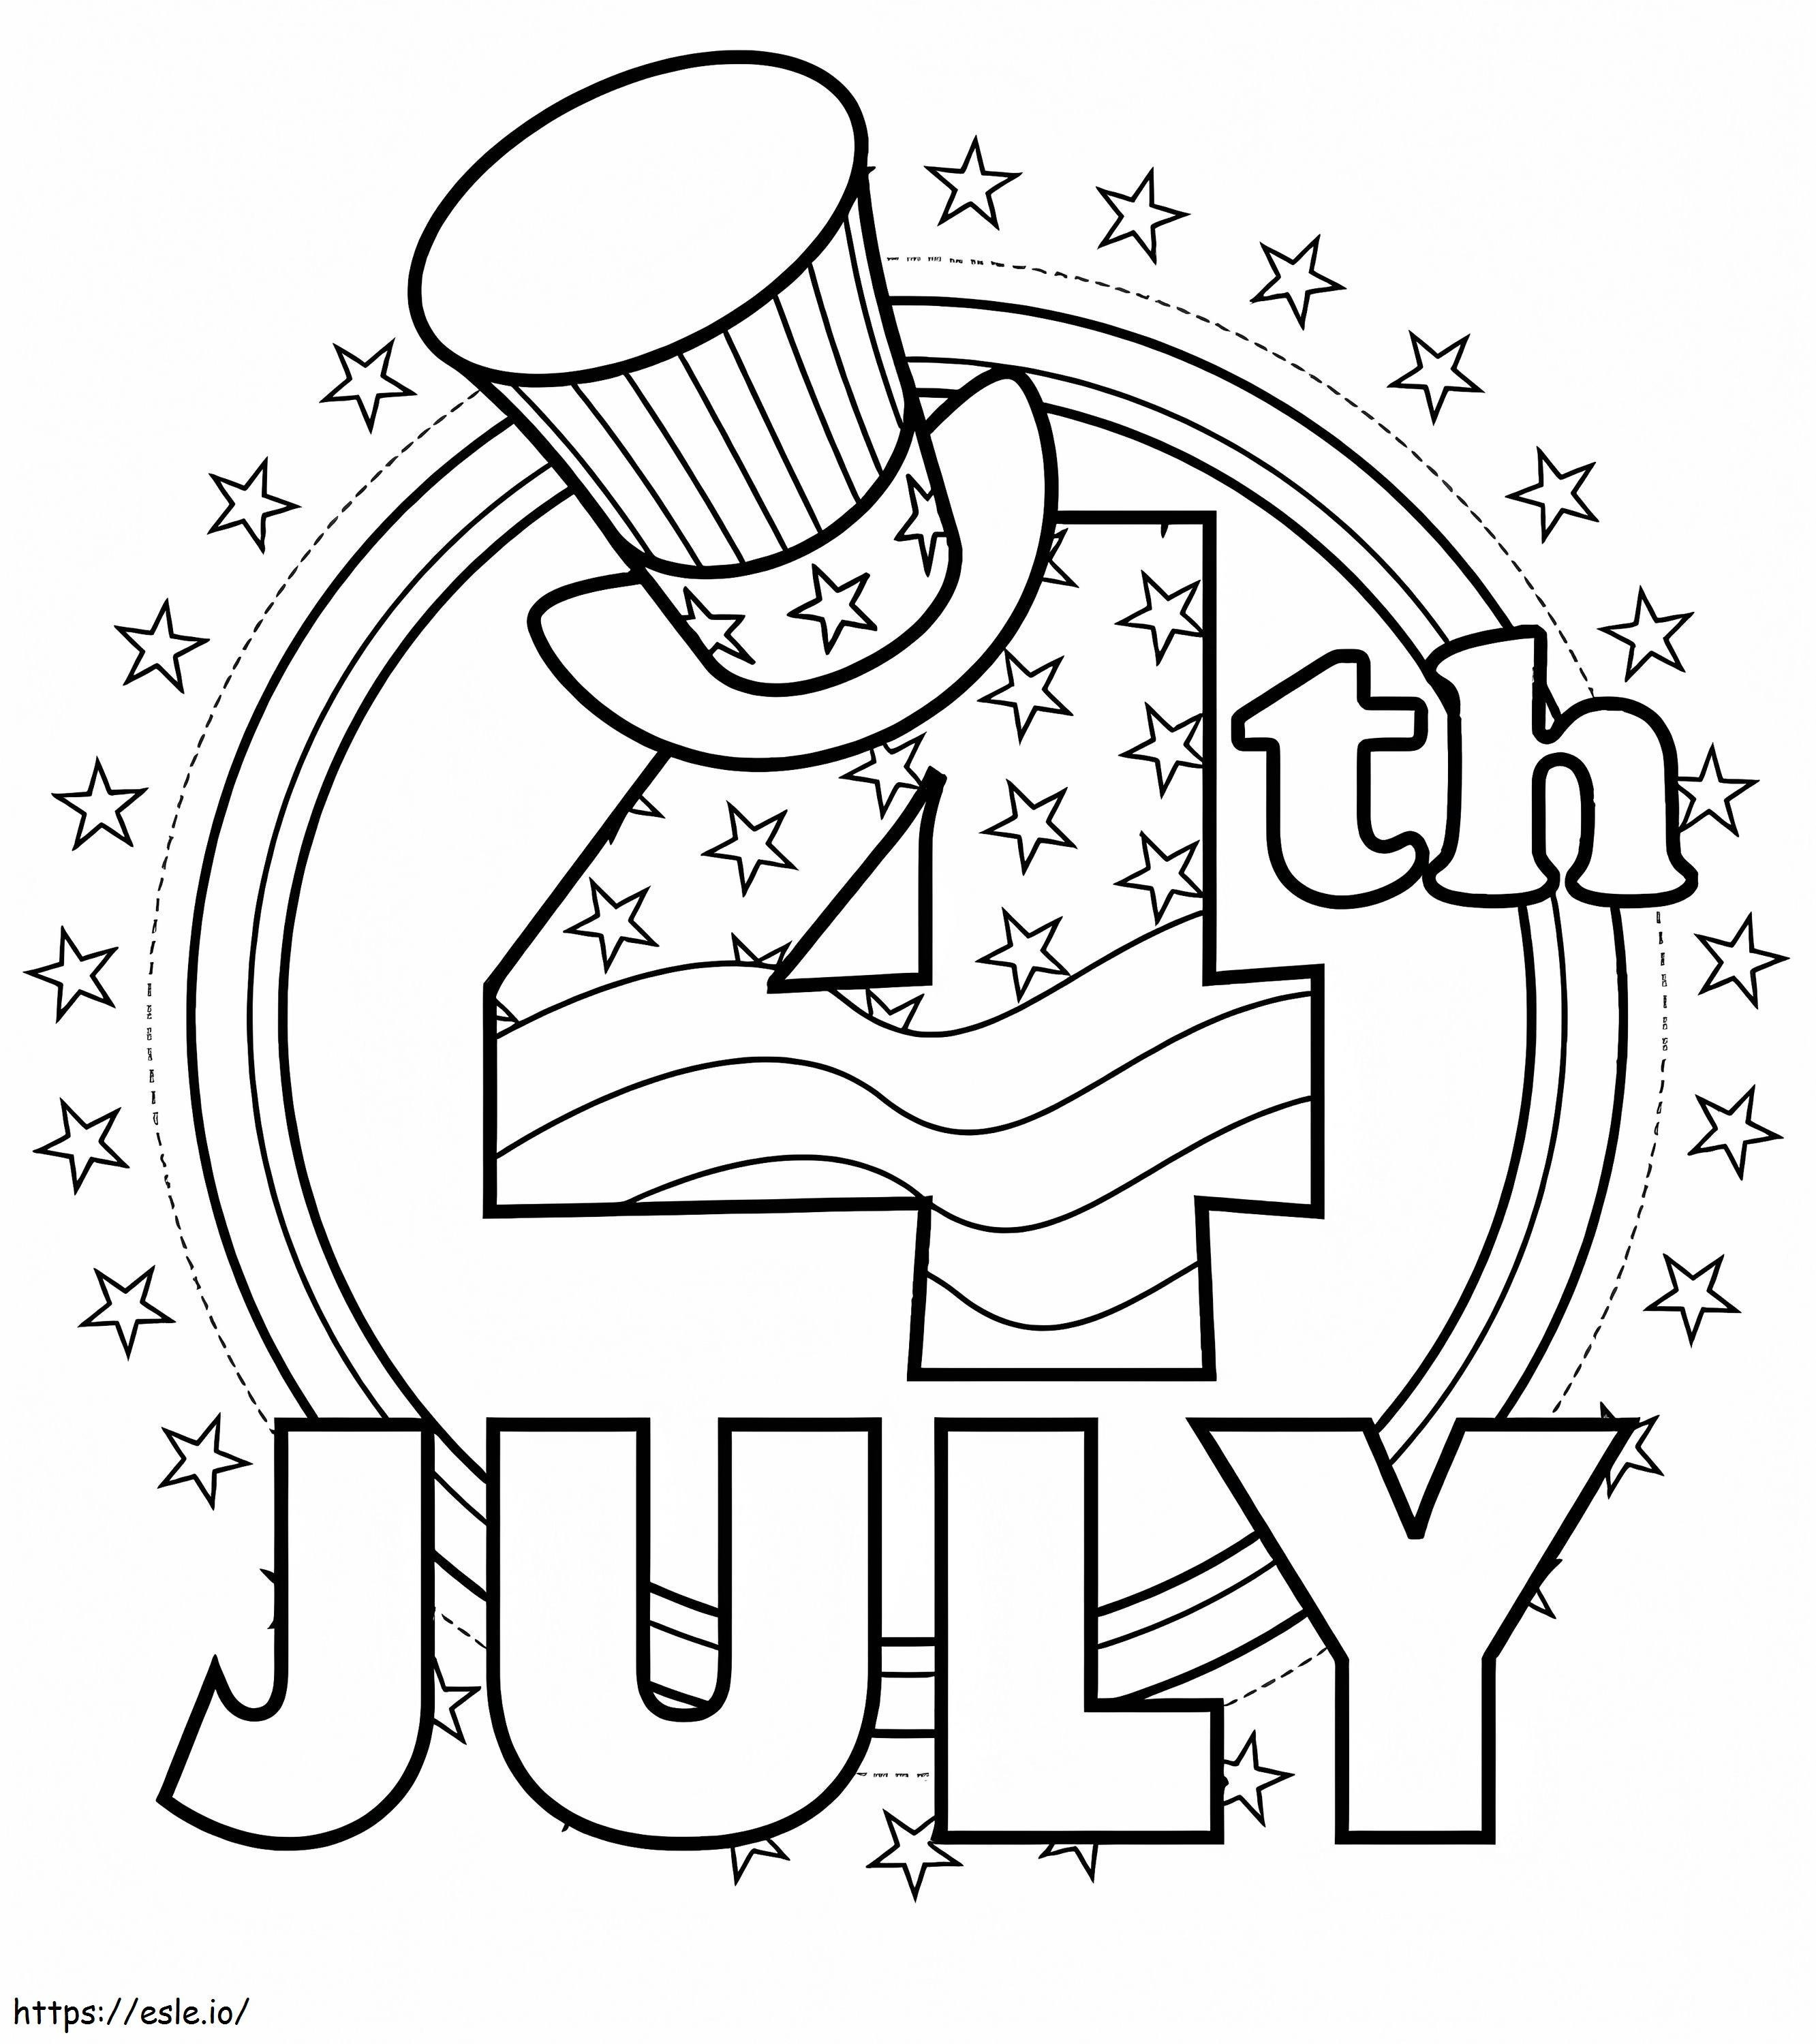 July 4Th coloring page